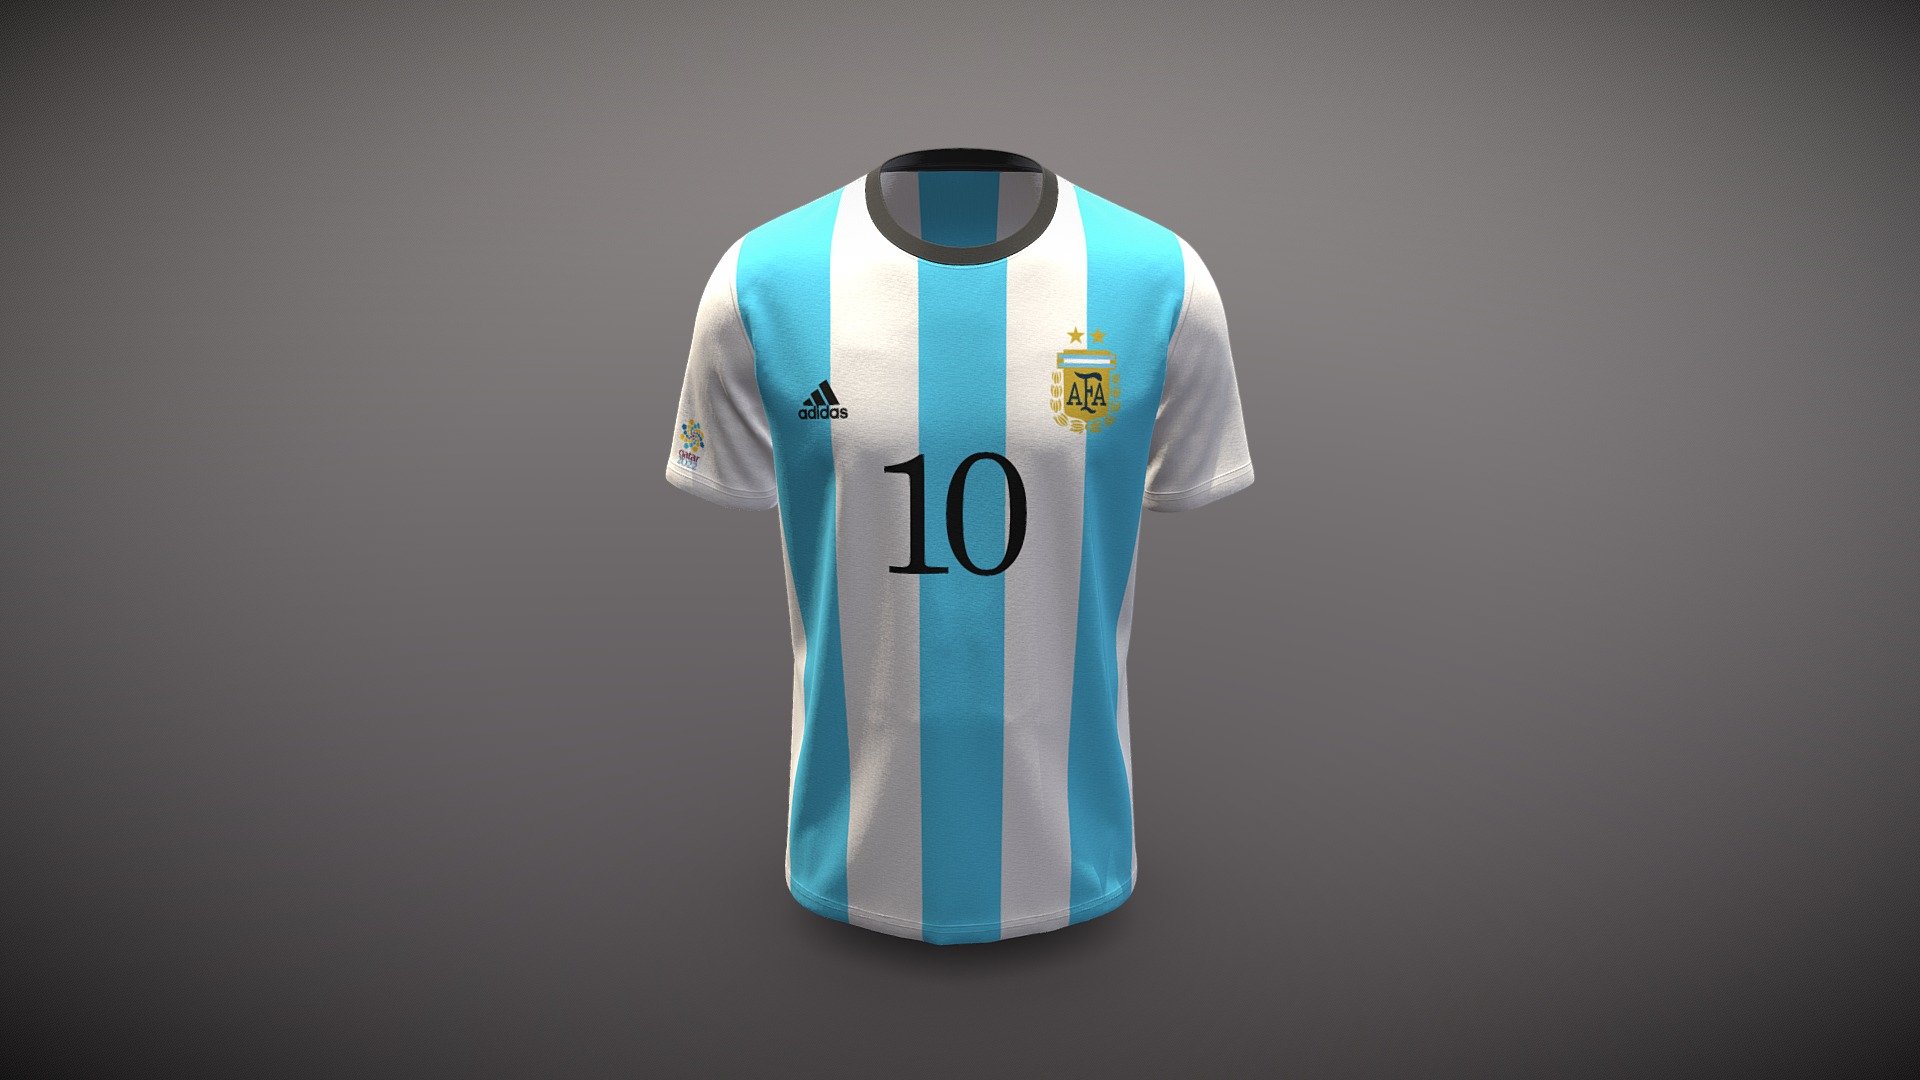 Cloth Title = 1986 Argentina Maradona Football Jersey T Shirt  

SKU = DG100044 

Category = Unisex 

Product Type = T-Shirt 

Cloth Length = Regular 

Body Fit = Loose Fit 

Occasion = Casual  

Sleeve Style = Set In Sleeve 


Our Services:

3D Apparel Design.

OBJ,FBX,GLTF Making with High/Low Poly.

Fabric Digitalization.

Mockup making.

3D Teck Pack.

Pattern Making.

2D Illustration.

Cloth Animation and 360 Spin Video.


Contact us:- 

Email: info@digitalfashionwear.com 

Website: https://digitalfashionwear.com 


We designed all the types of cloth specially focused on product visualization, e-commerce, fitting, and production. 

We will design: 

T-shirts 

Polo shirts 

Hoodies 

Sweatshirt 

Jackets 

Shirts 

TankTops 

Trousers 

Bras 

Underwear 

Blazer 

Aprons 

Leggings 

and All Fashion items. 





Our goal is to make sure what we provide you, meets your demand 3d model